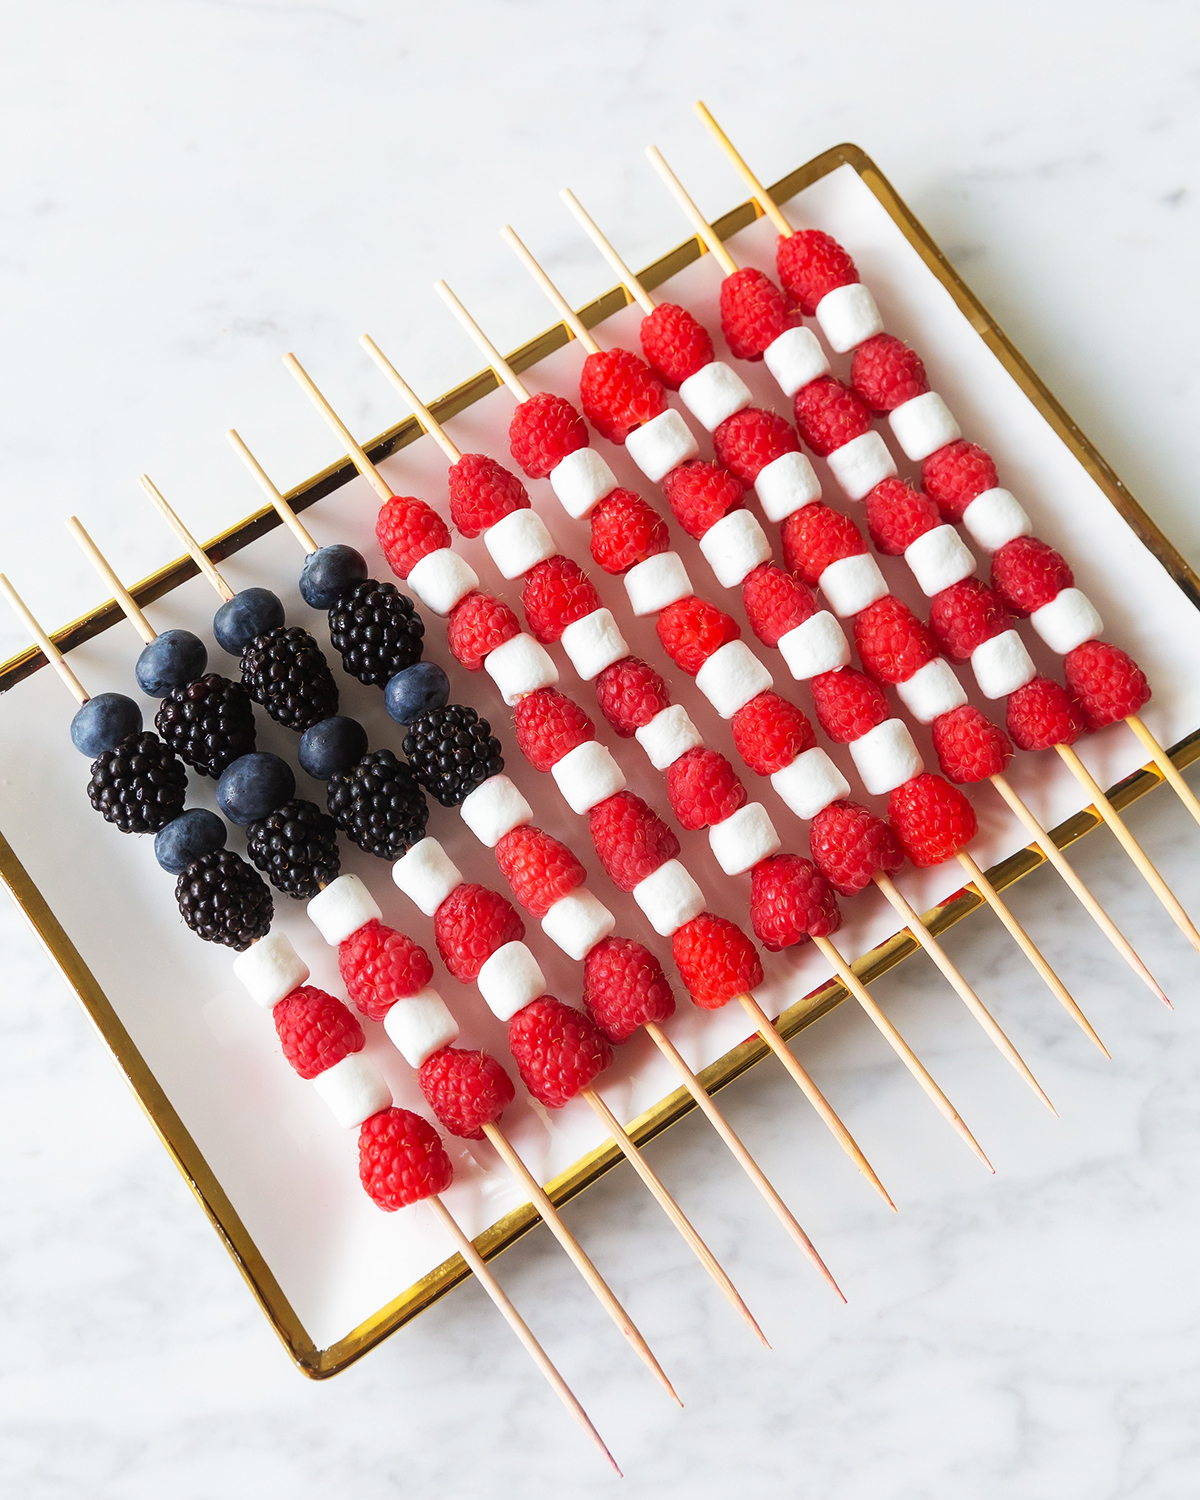 Last Minute Recipes For The Fourth of July